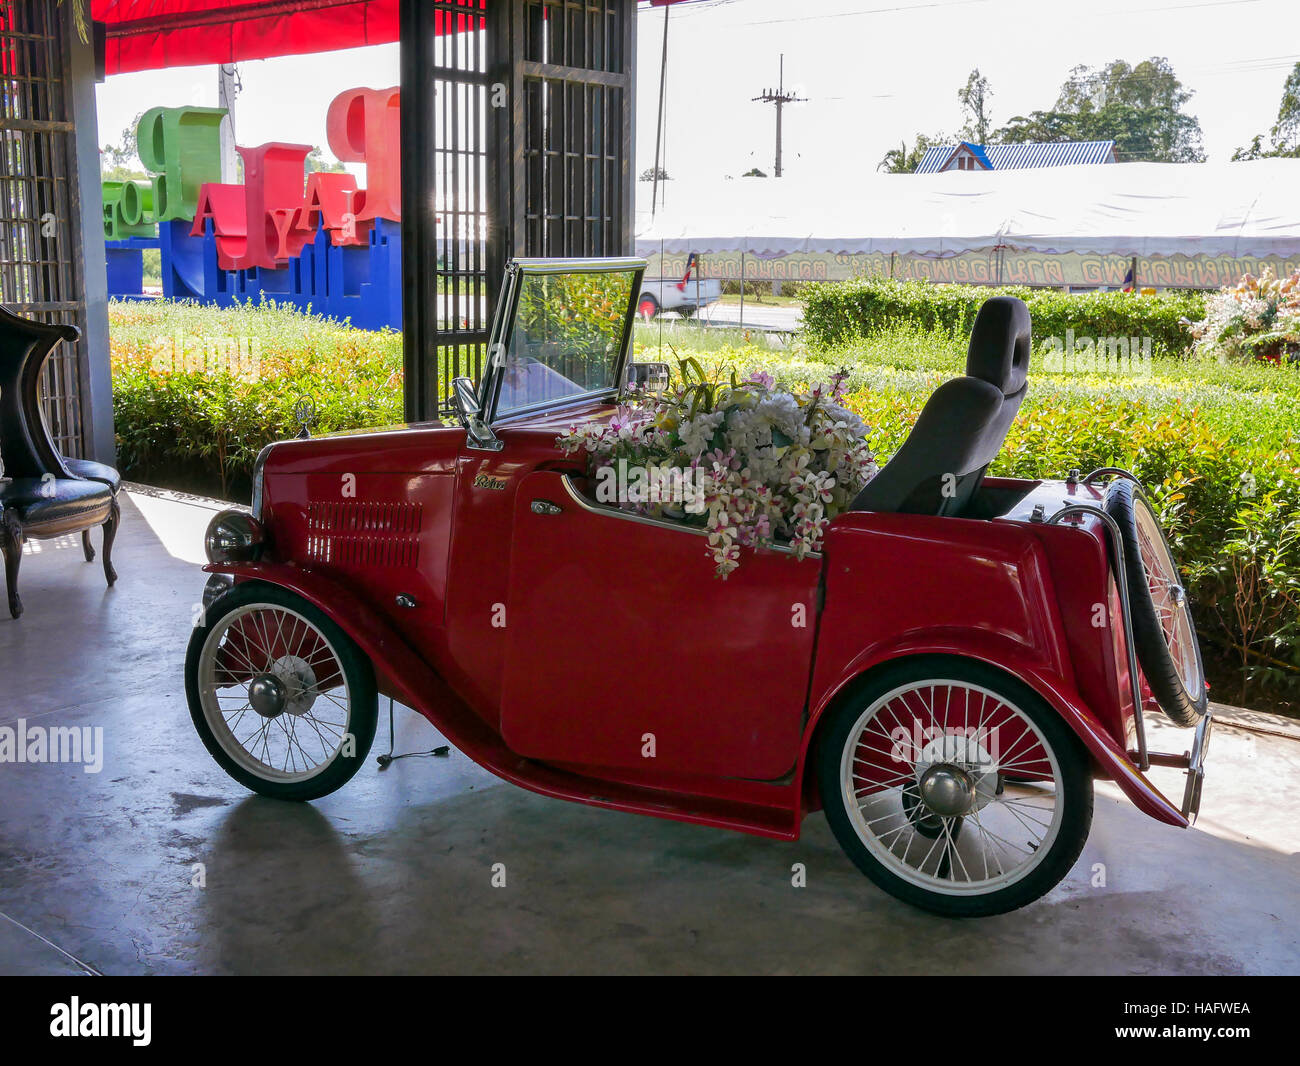 decorative red old car with flowers Stock Photo